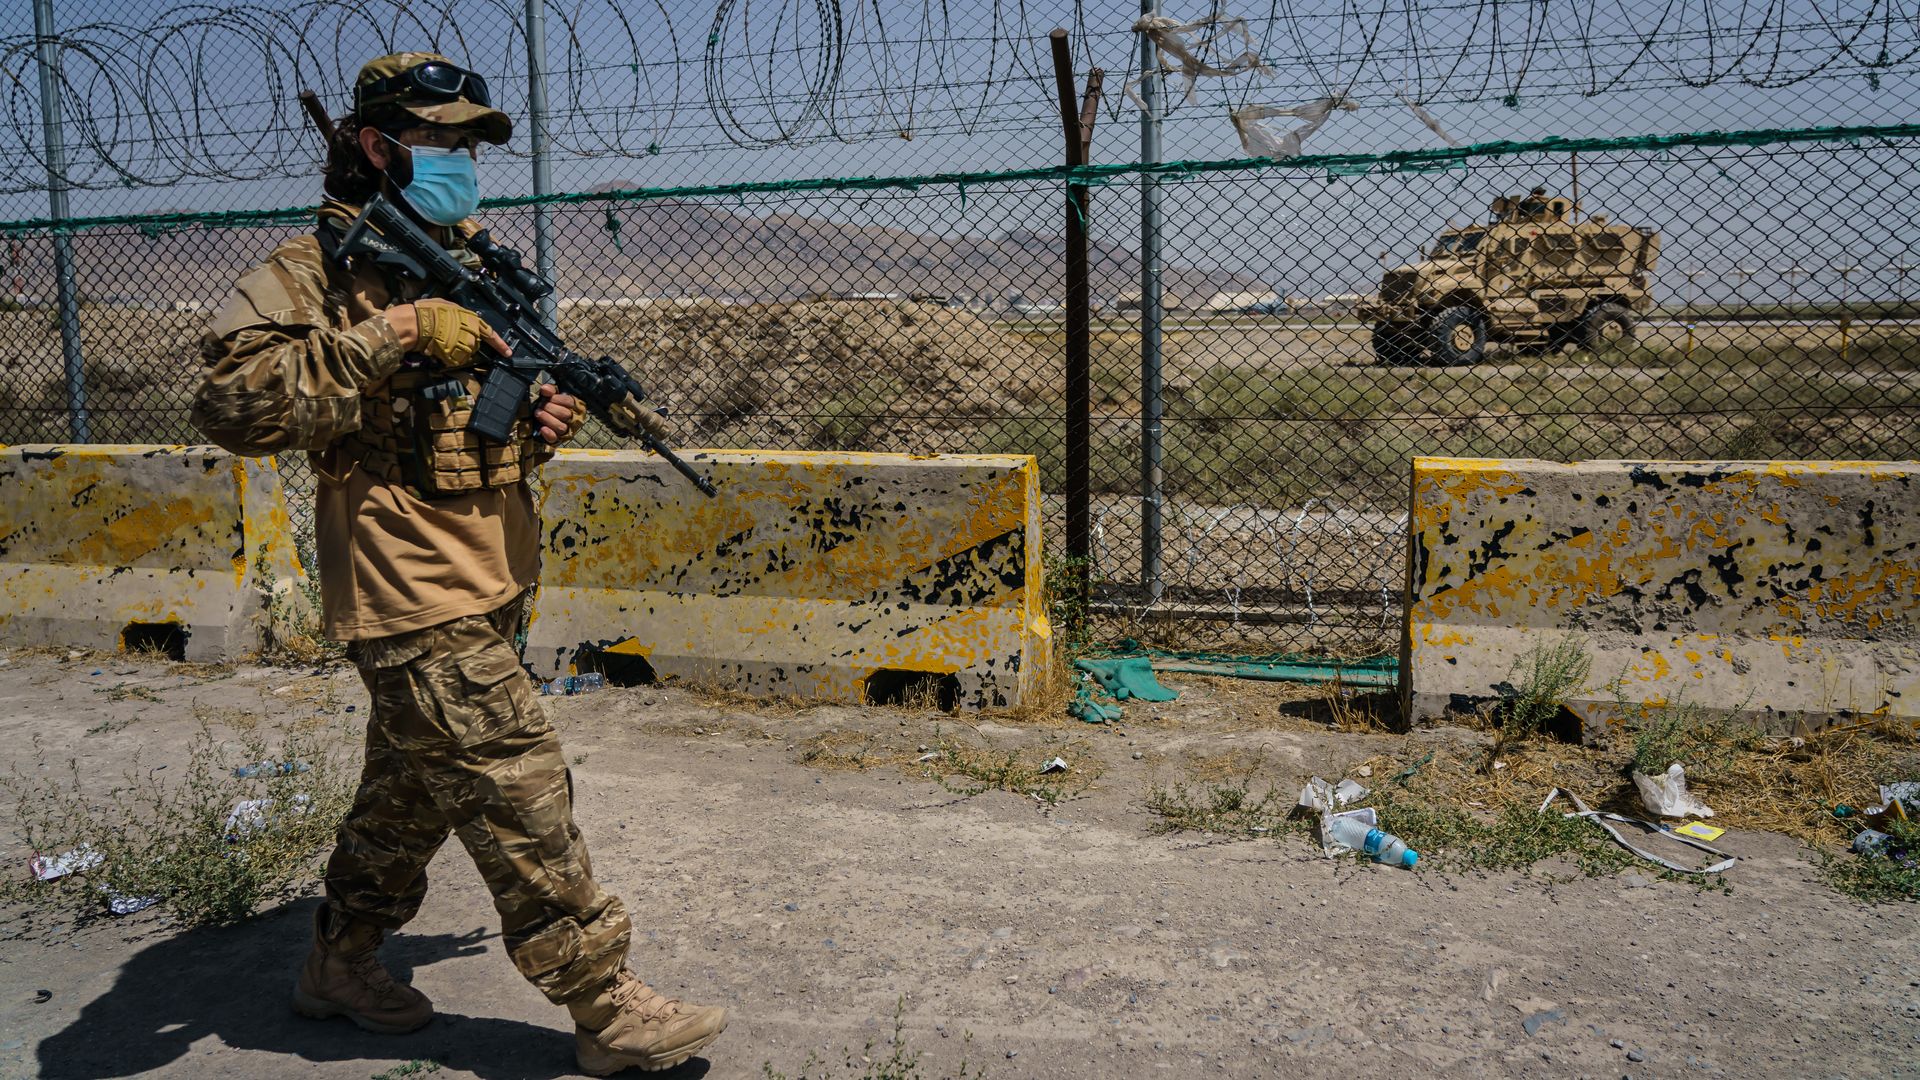 Taliban fighters secure the outer perimeter, in plain sight of the American forces that control the Hamid Karzai International Airport in Kabul, Afghanistan